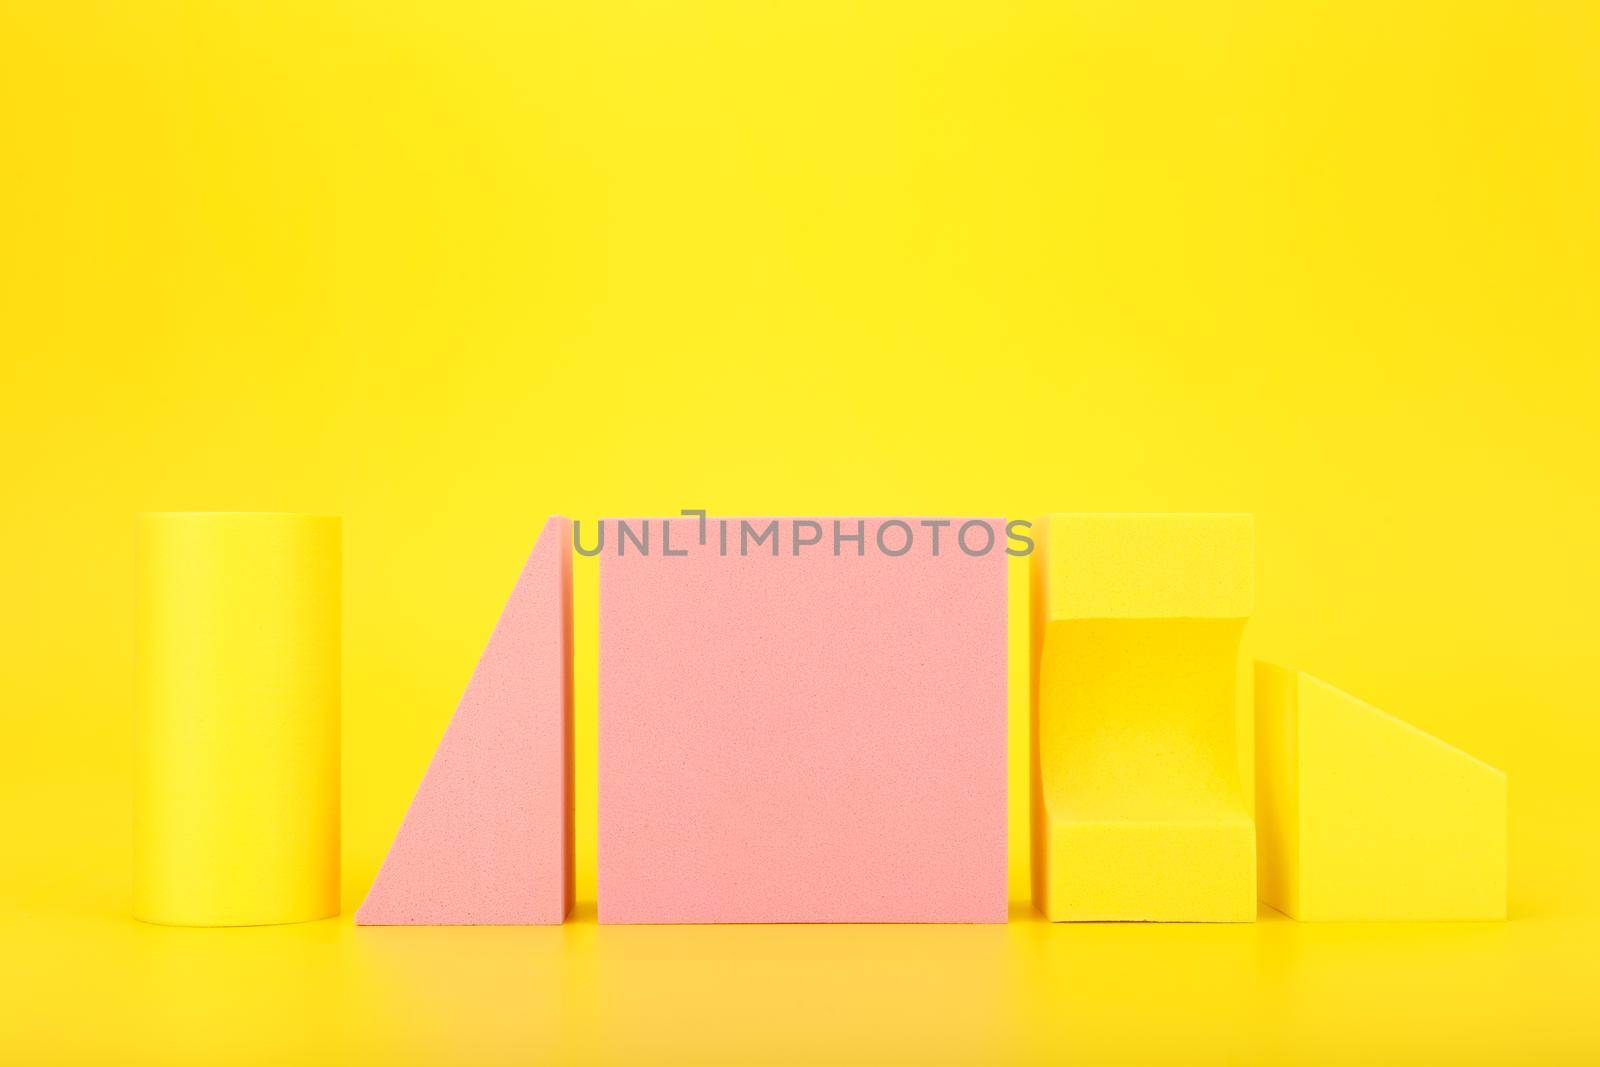 Abstract trendy futuristic background in yellow and pink colors with copy space. Bright artsy background with geometric shapes against yellow background with copy space